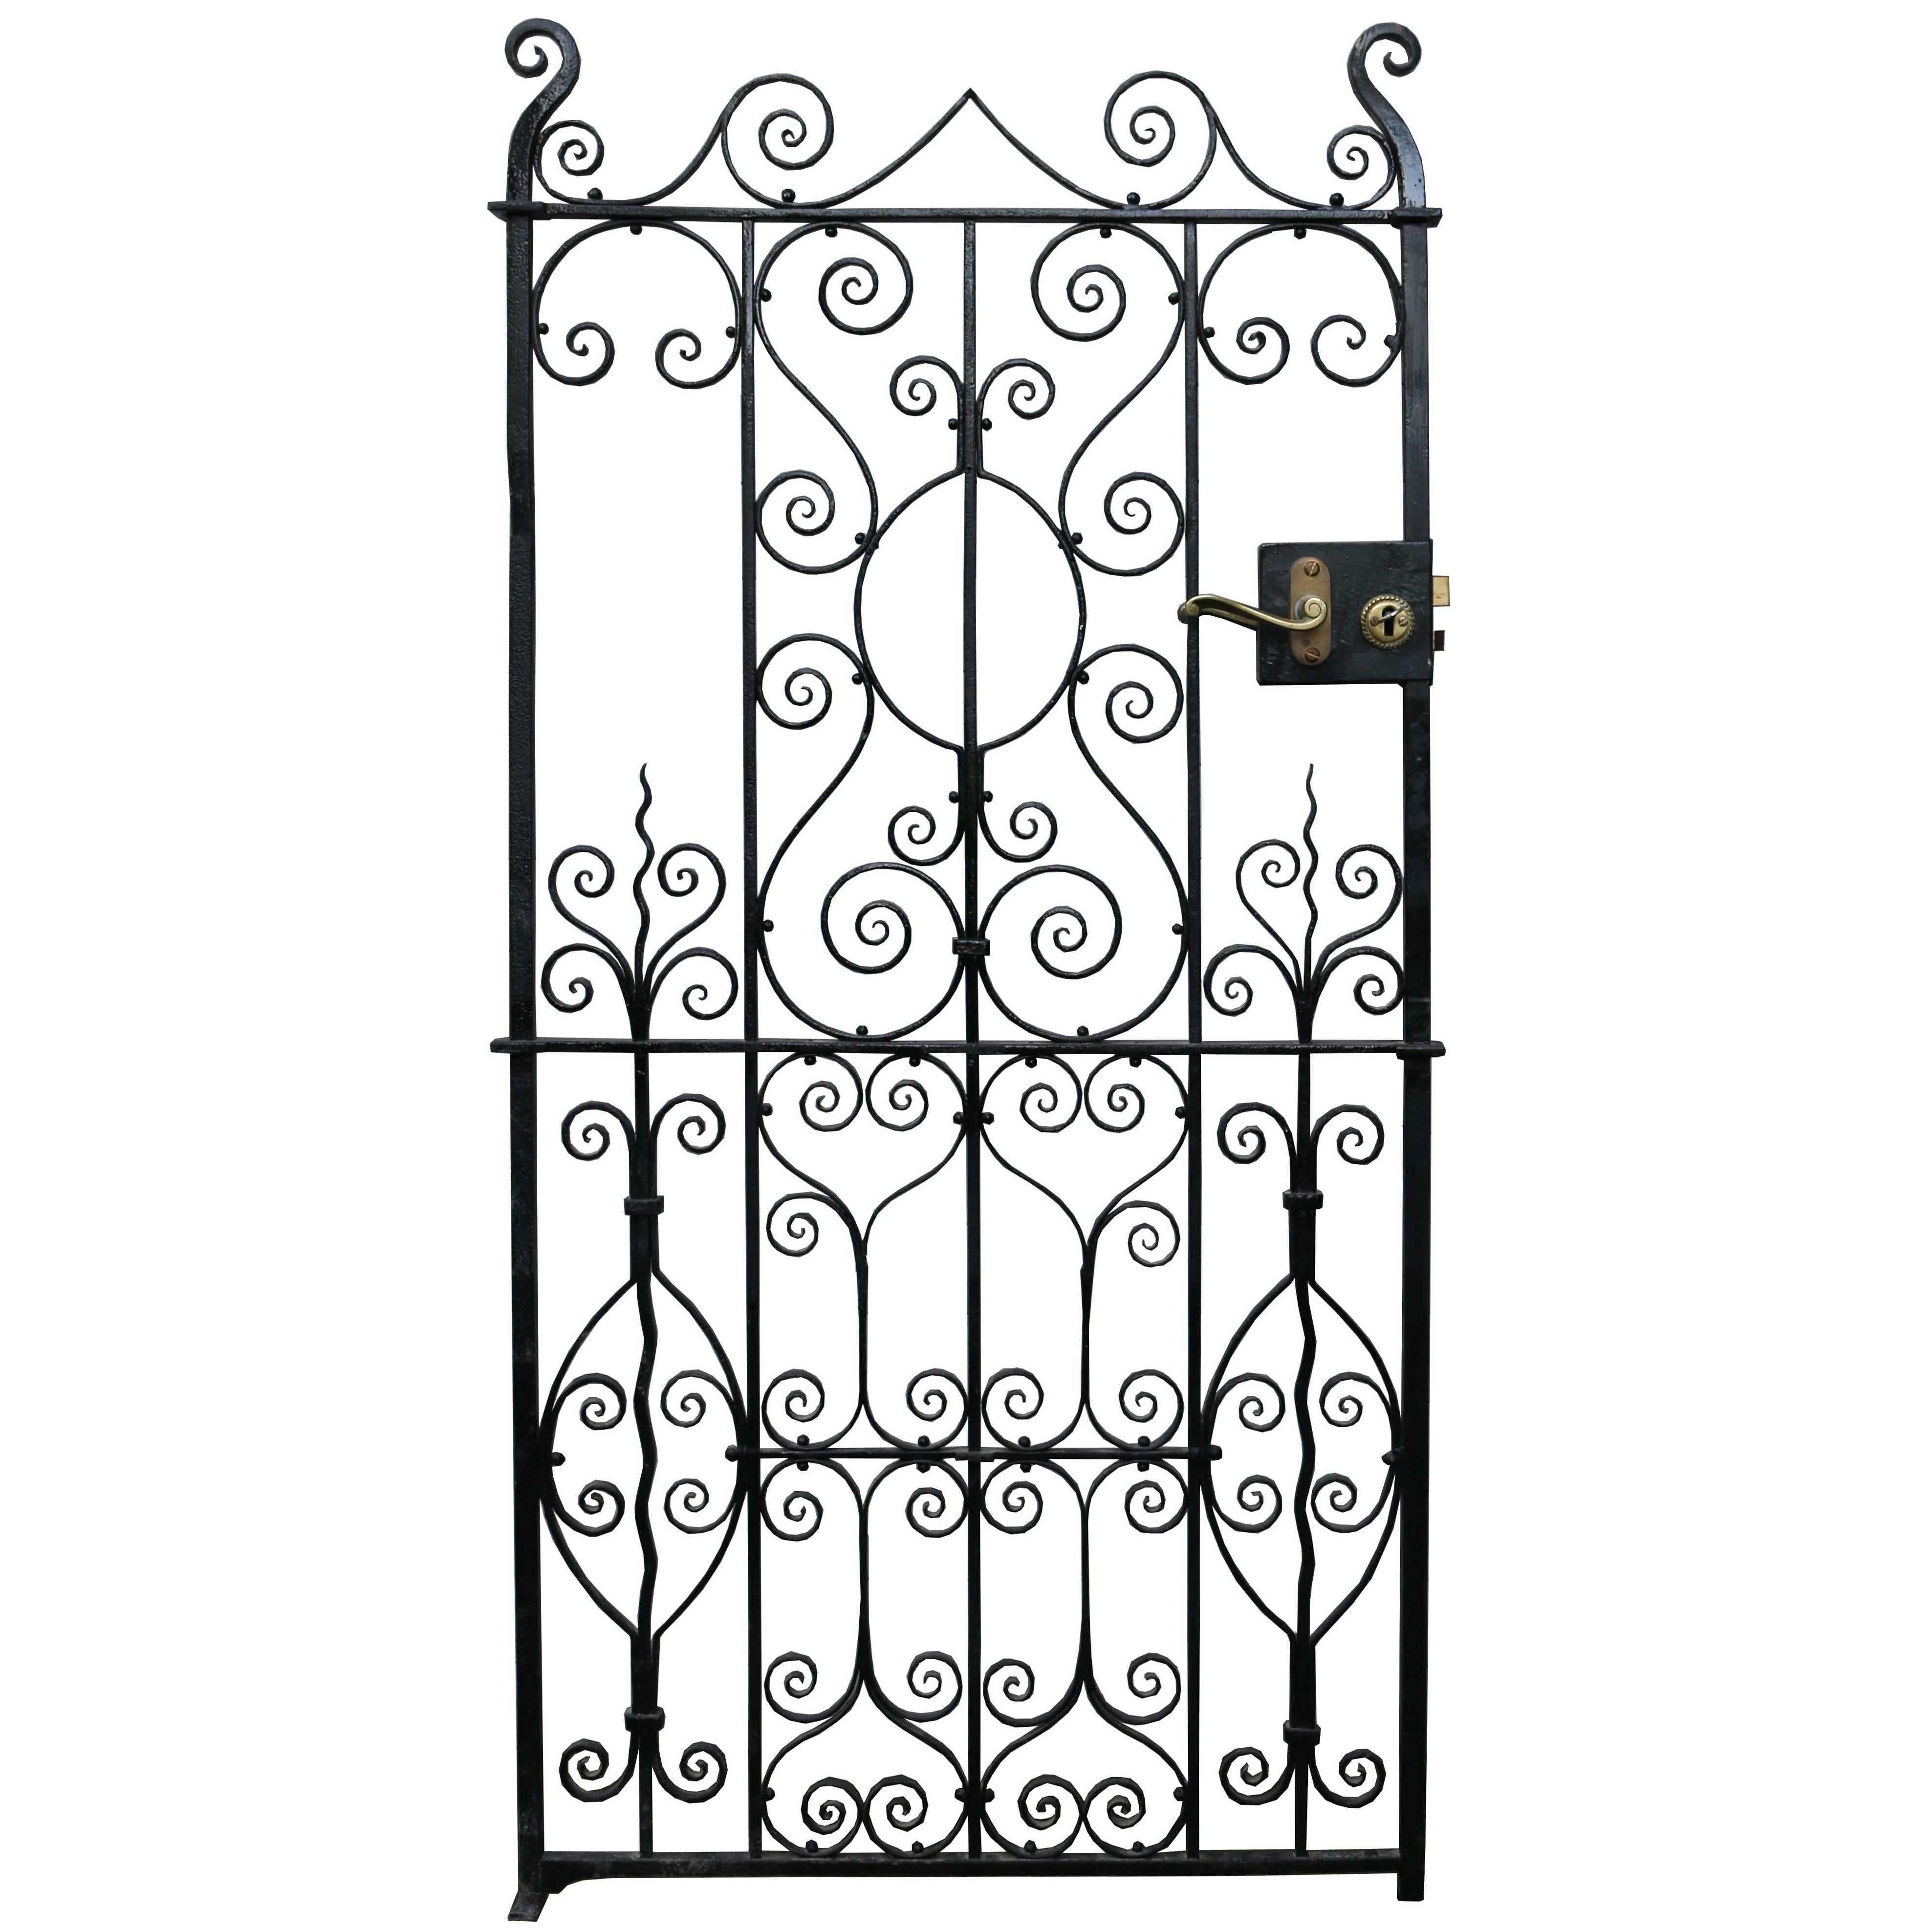 Antique Wrought Iron Side Gate